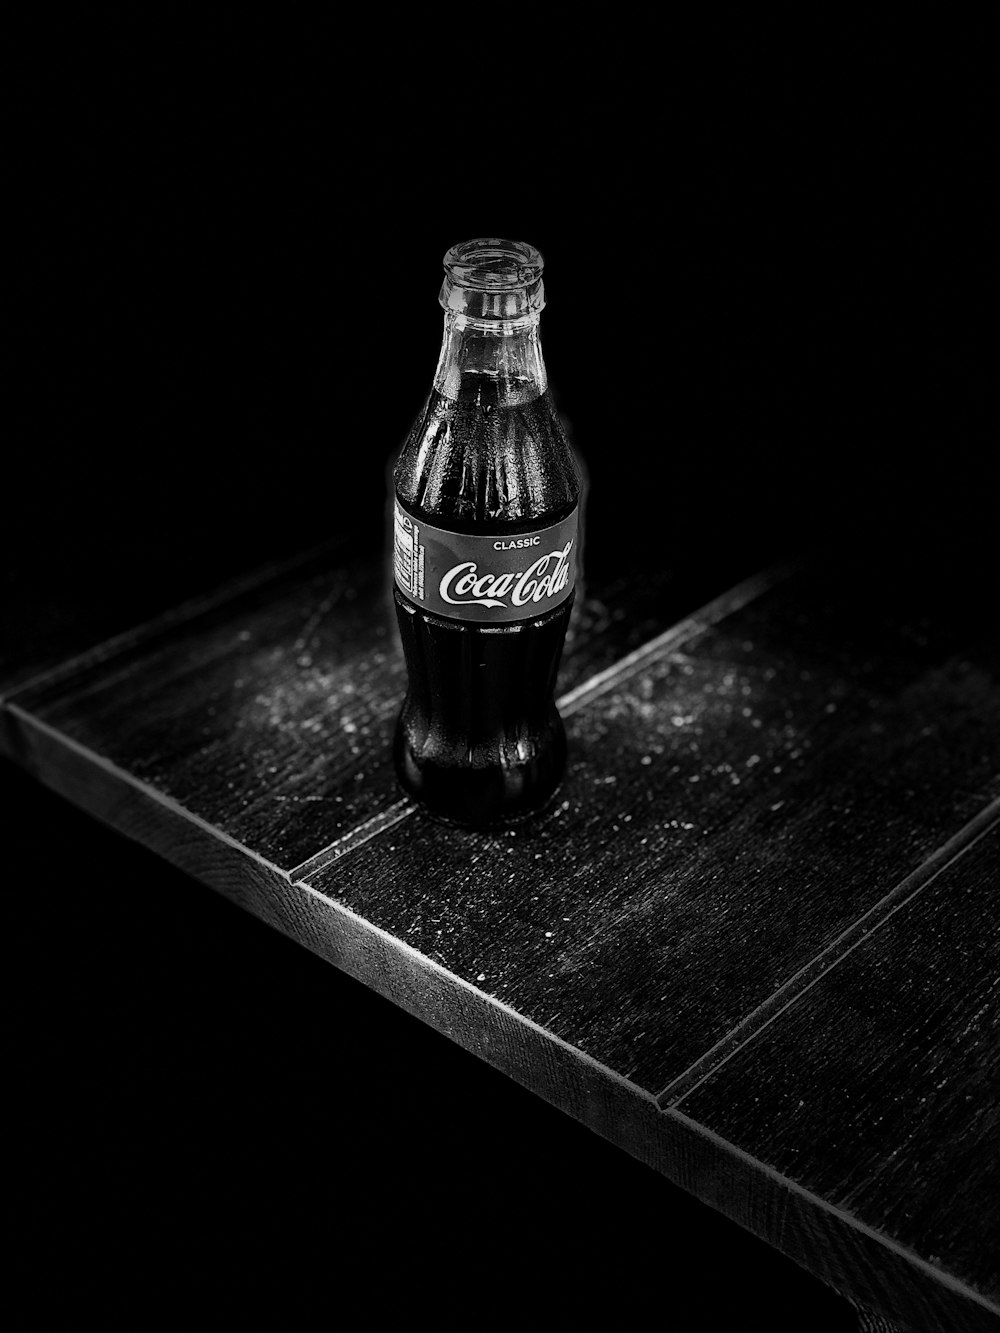 grayscale photography of Coca-Cola bottle on table